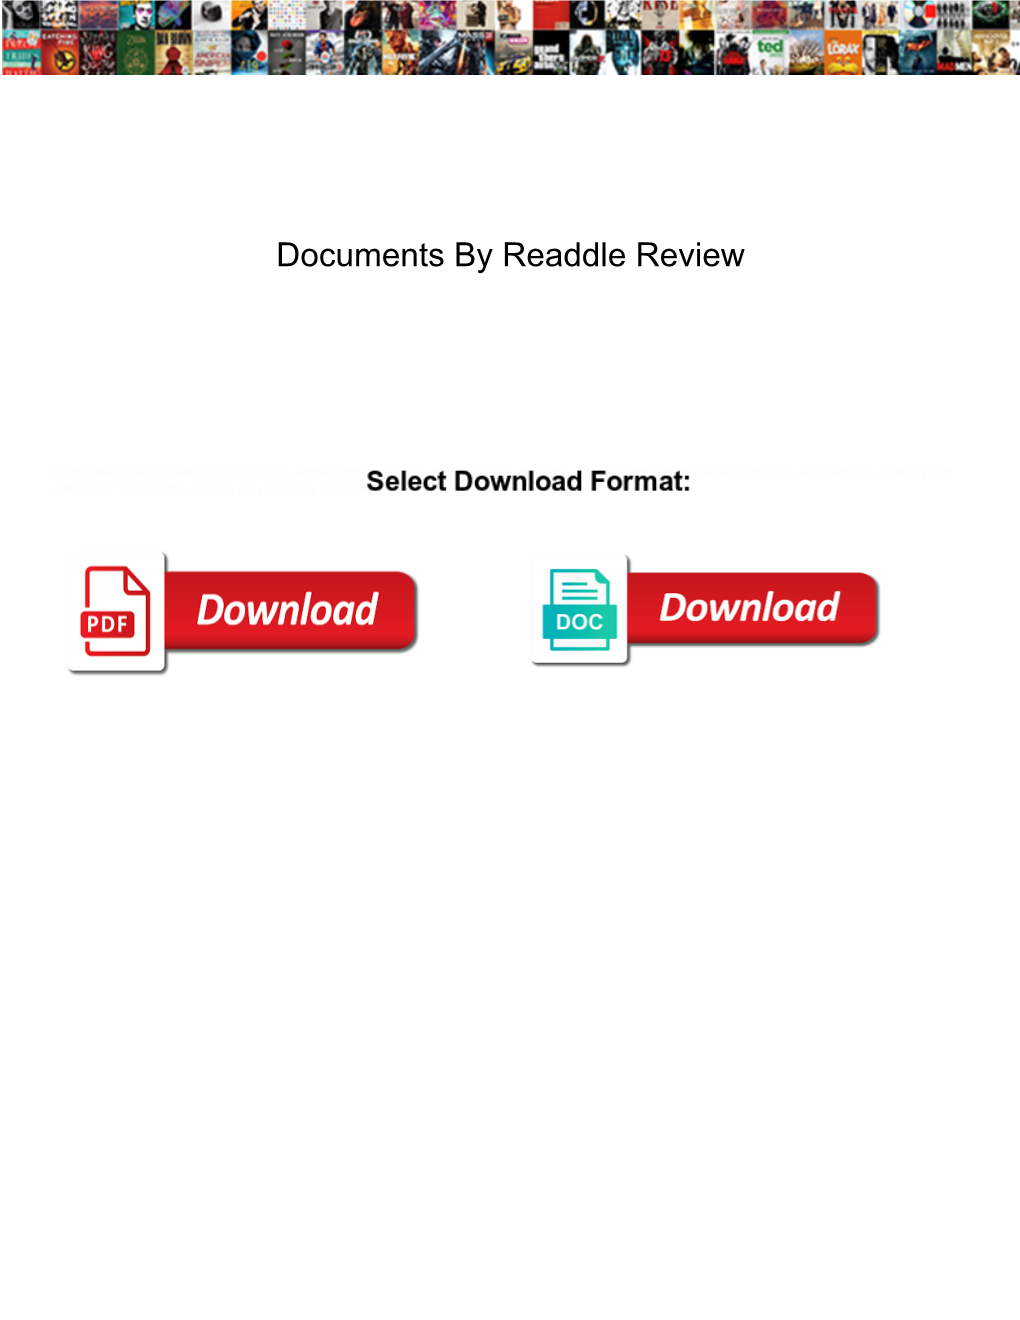 Documents by Readdle Review